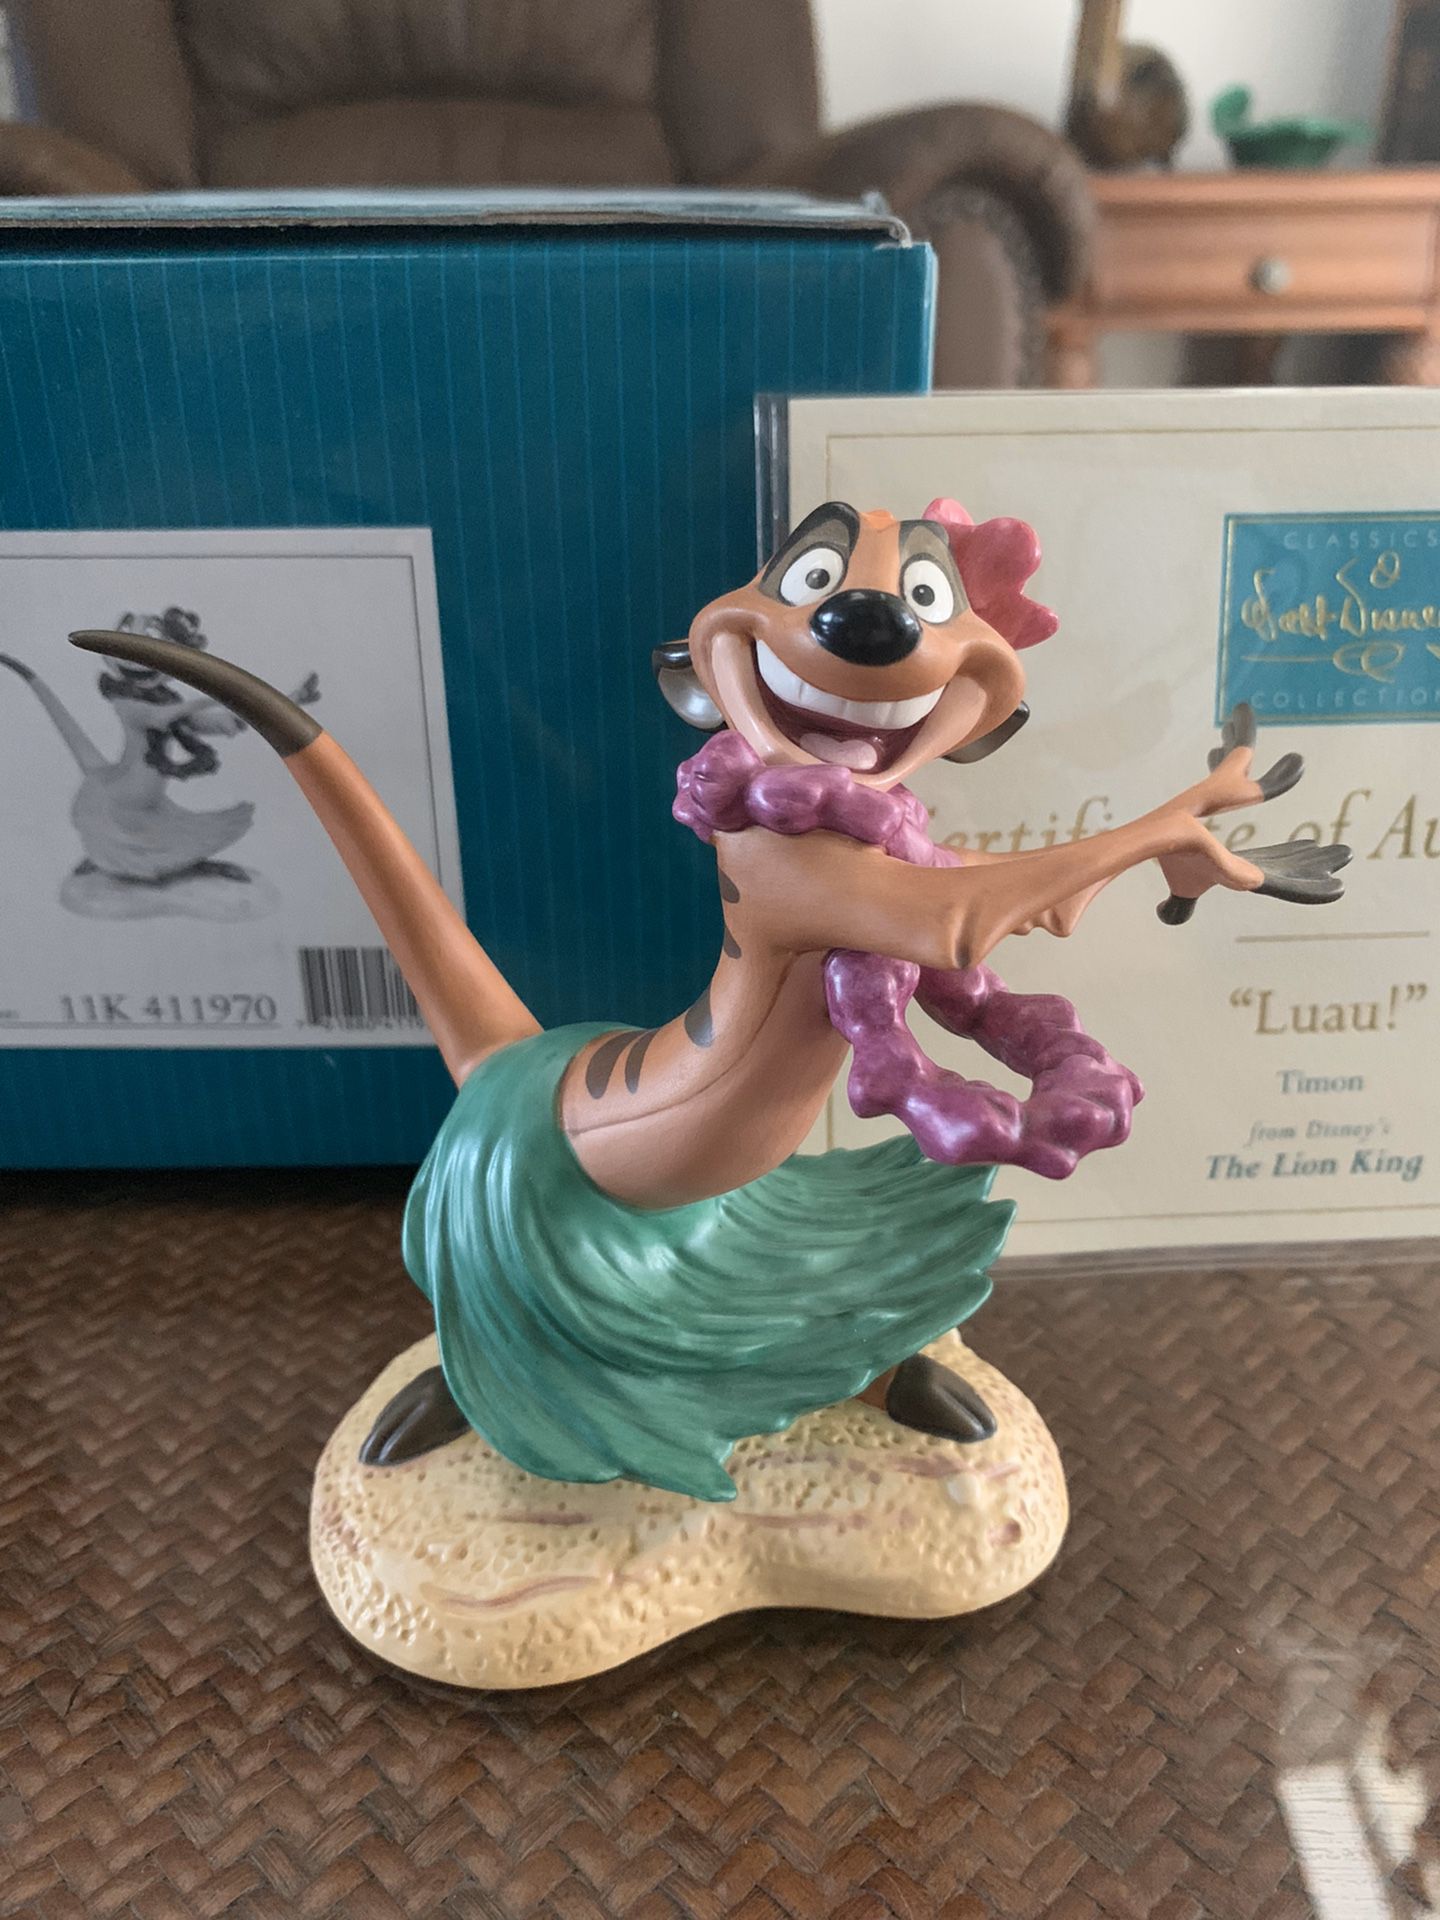 Disney WDCC Lion King 411970 "Luau" Timon 4” Figurine w/CoA and w/Box and new in package pin